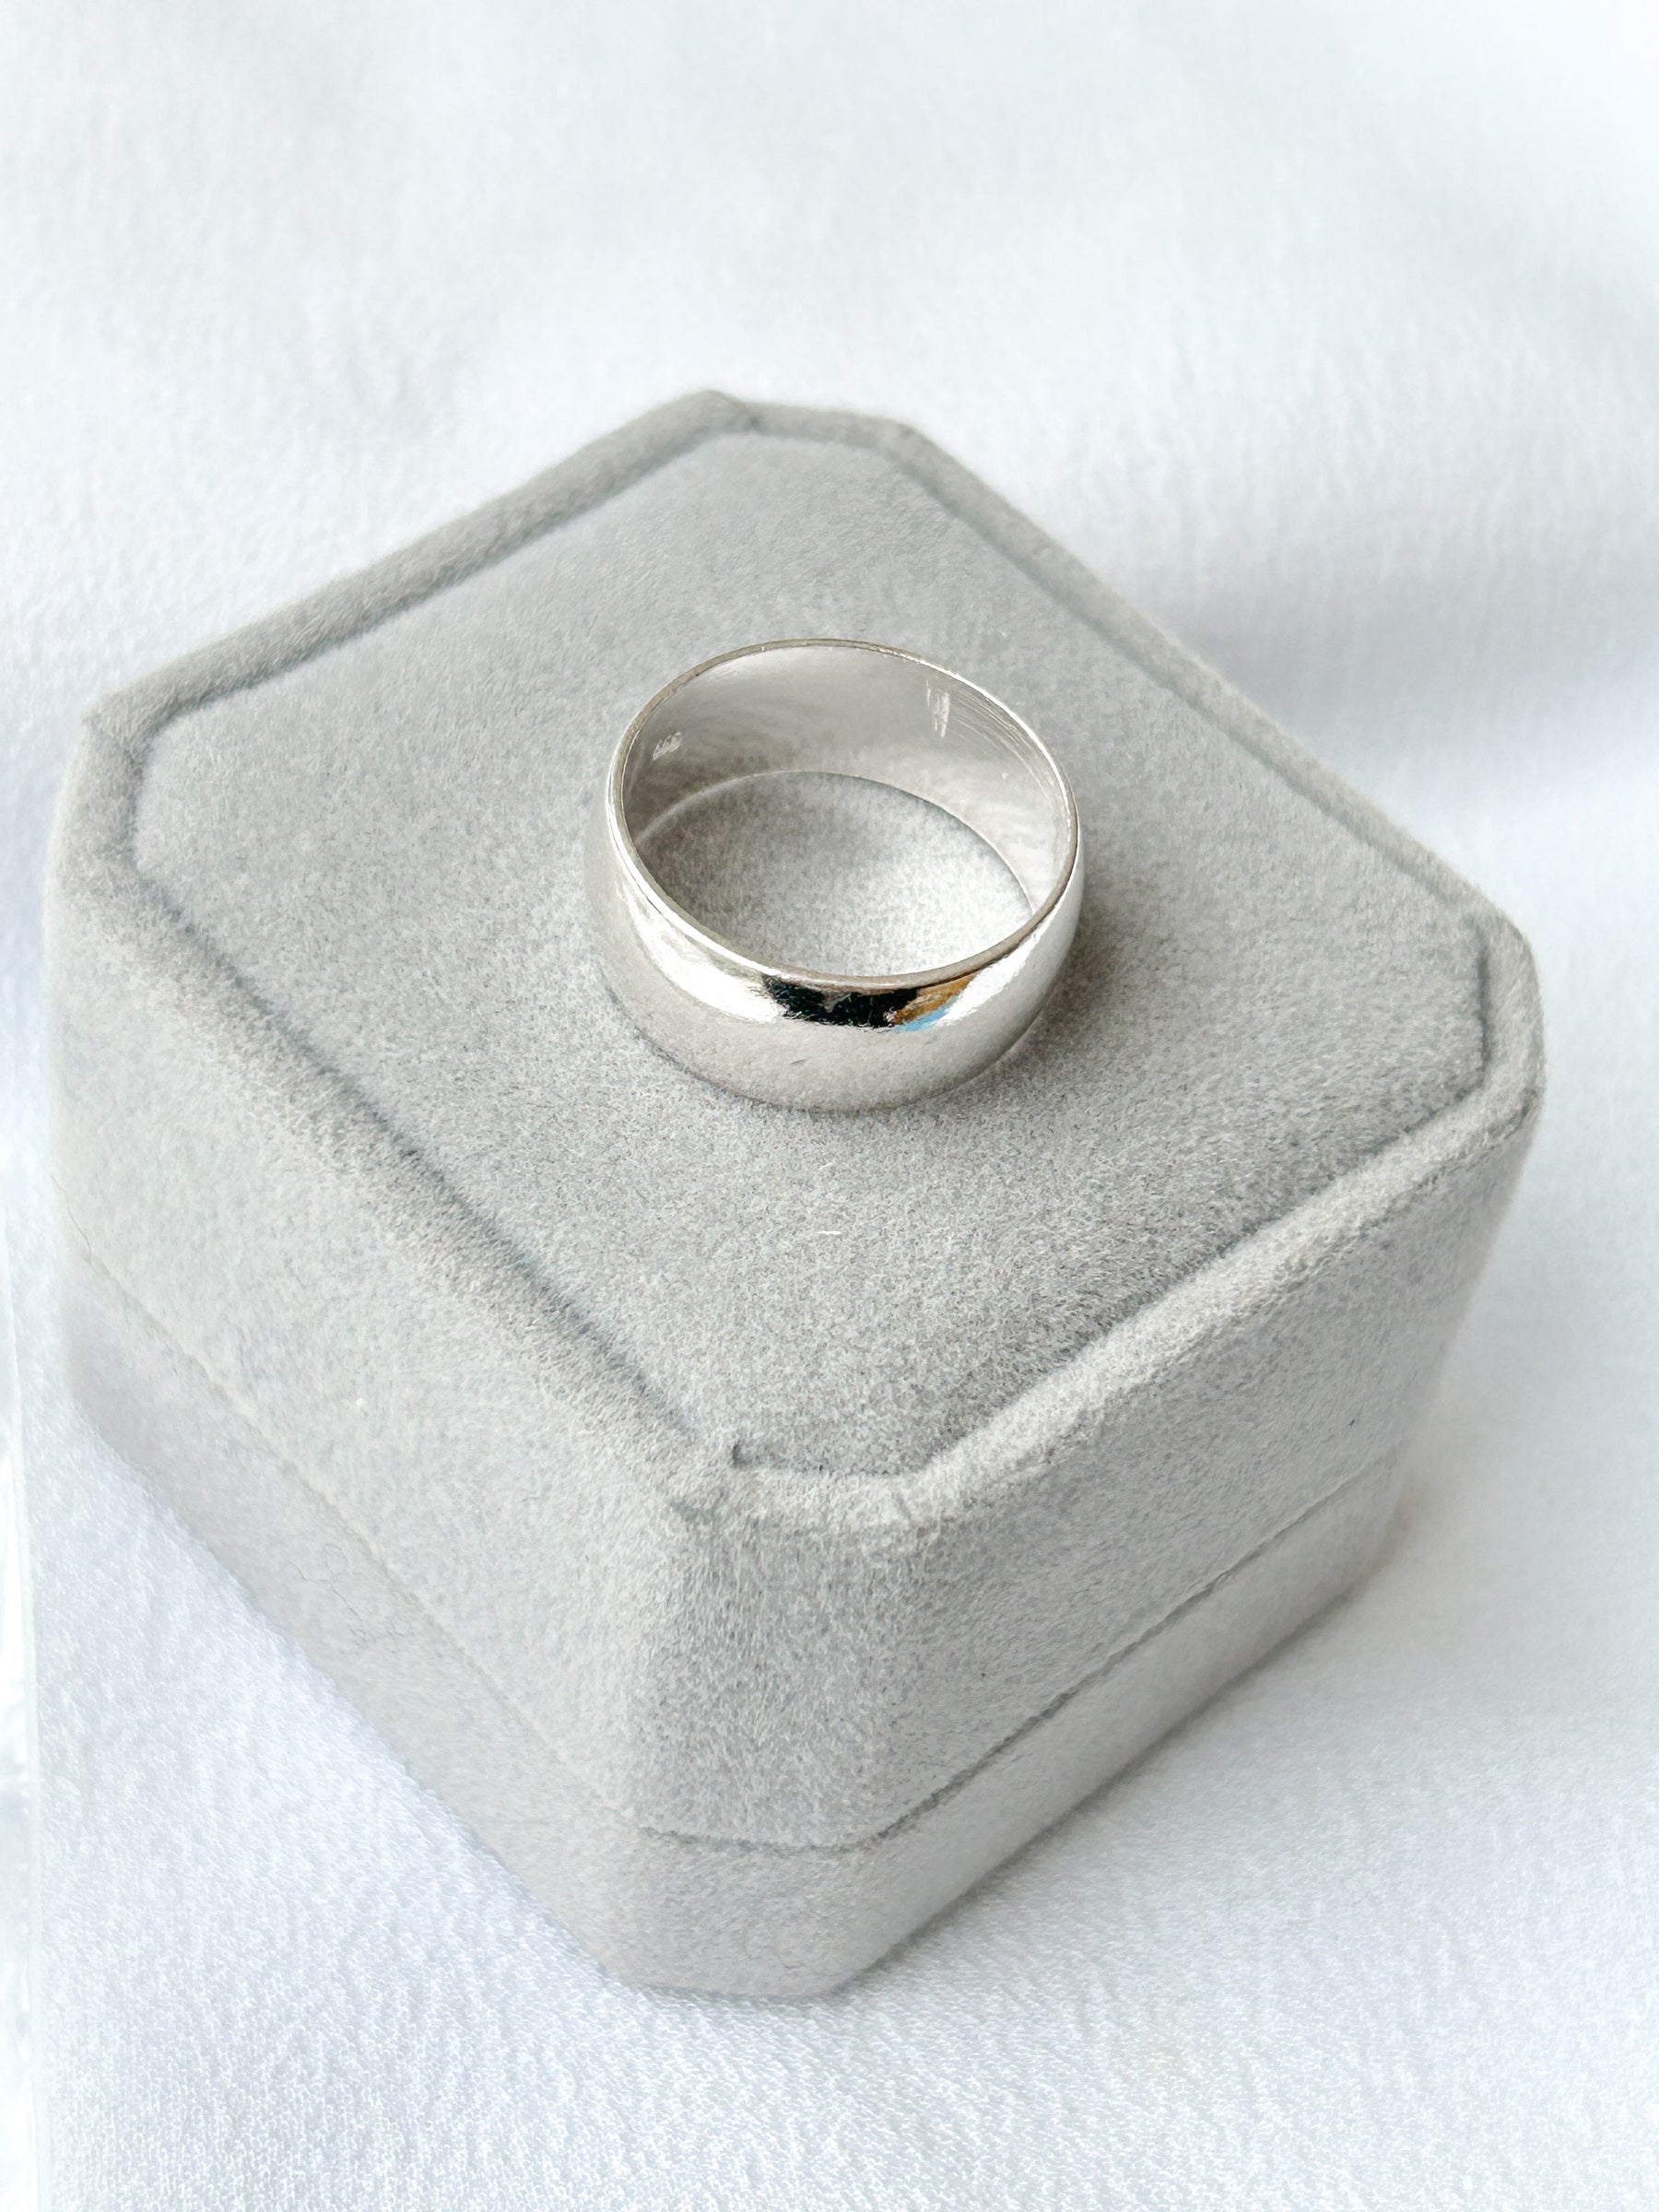 Rounded Ring 0.8cm S999